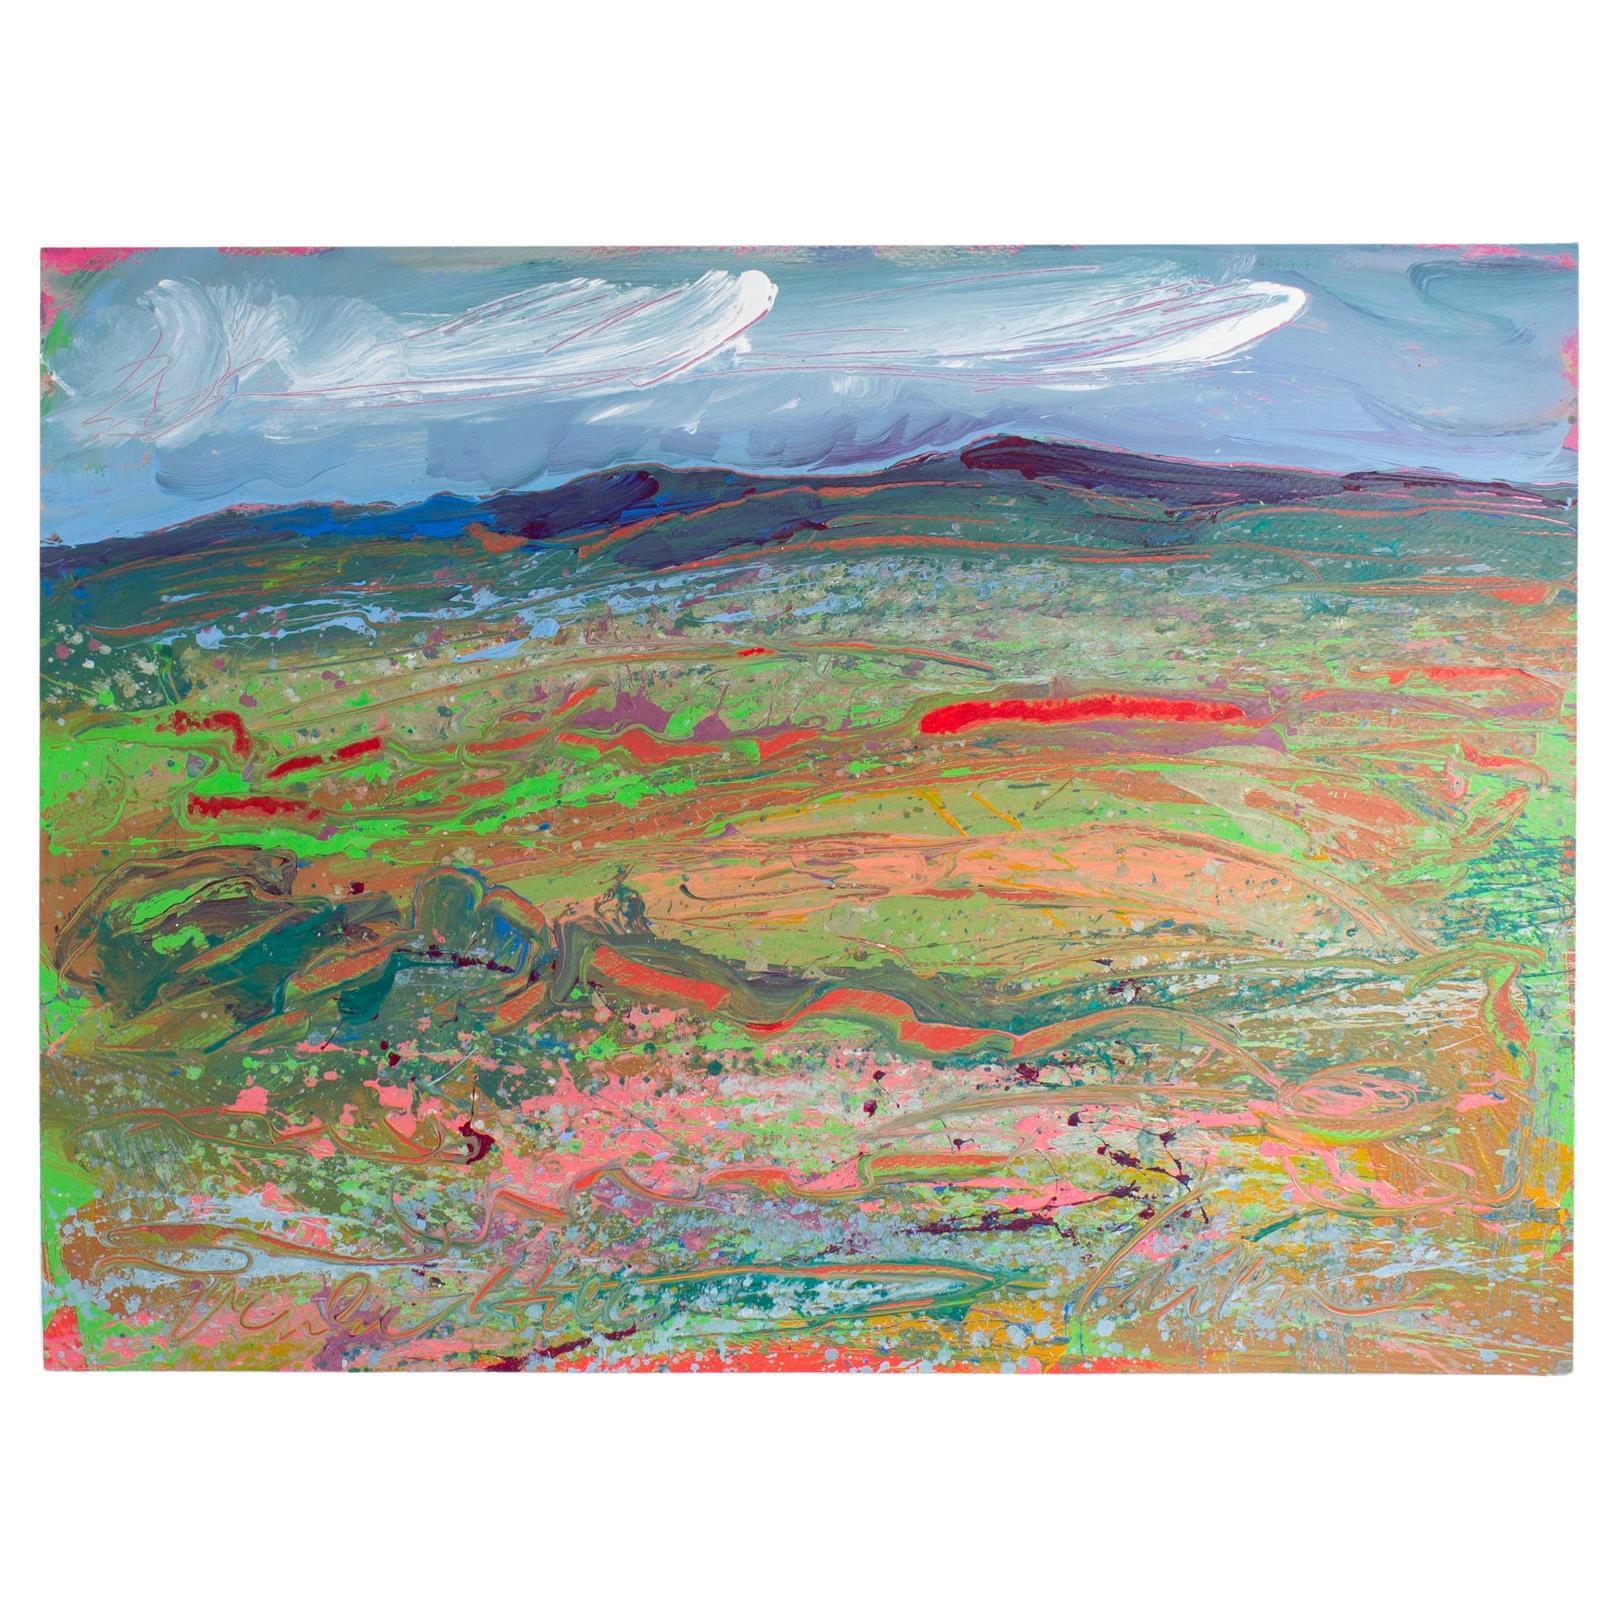 Harry Hilson Signed 1980s “Verdant Hills” Acrylic on Paper Landscape Painting For Sale